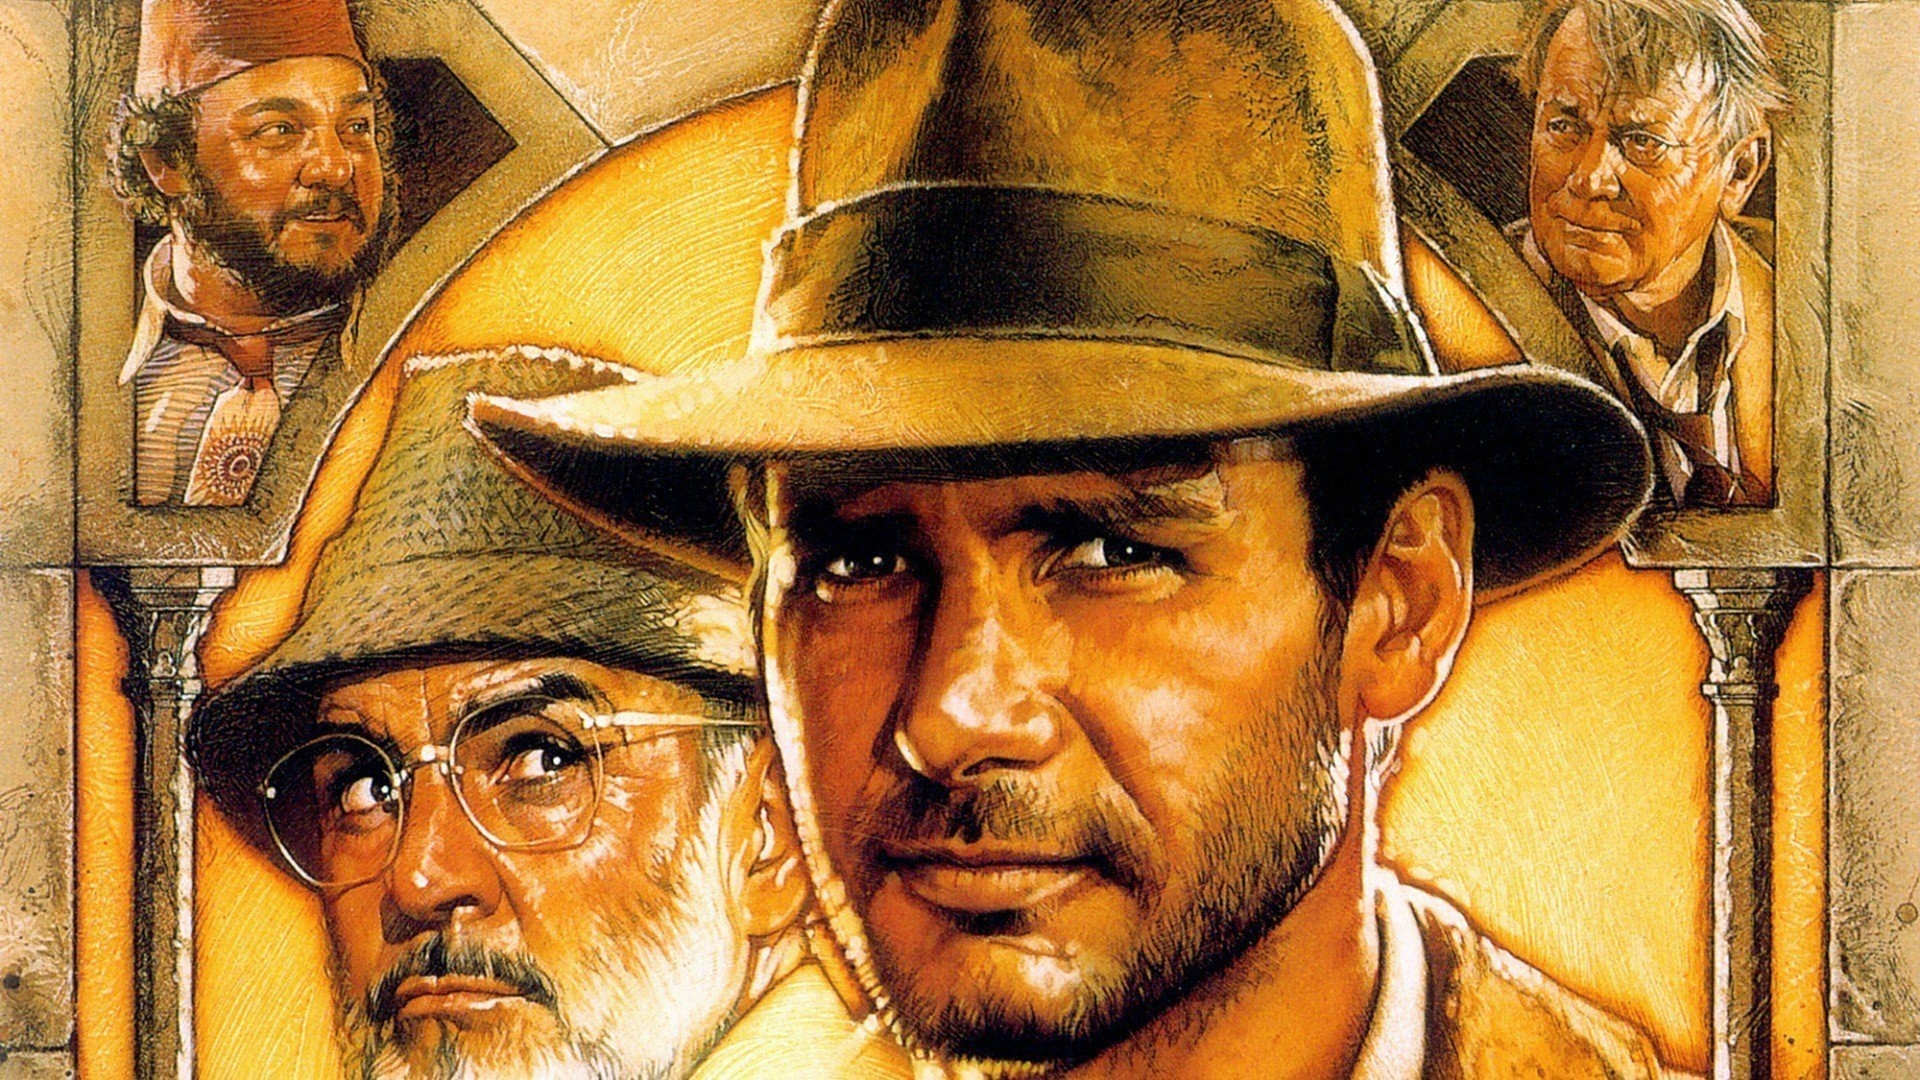 Harrison Ford (Indiana Jones): The Last Crusade, Jone's father, portrayed by Sean Connery. 1920x1080 Full HD Background.